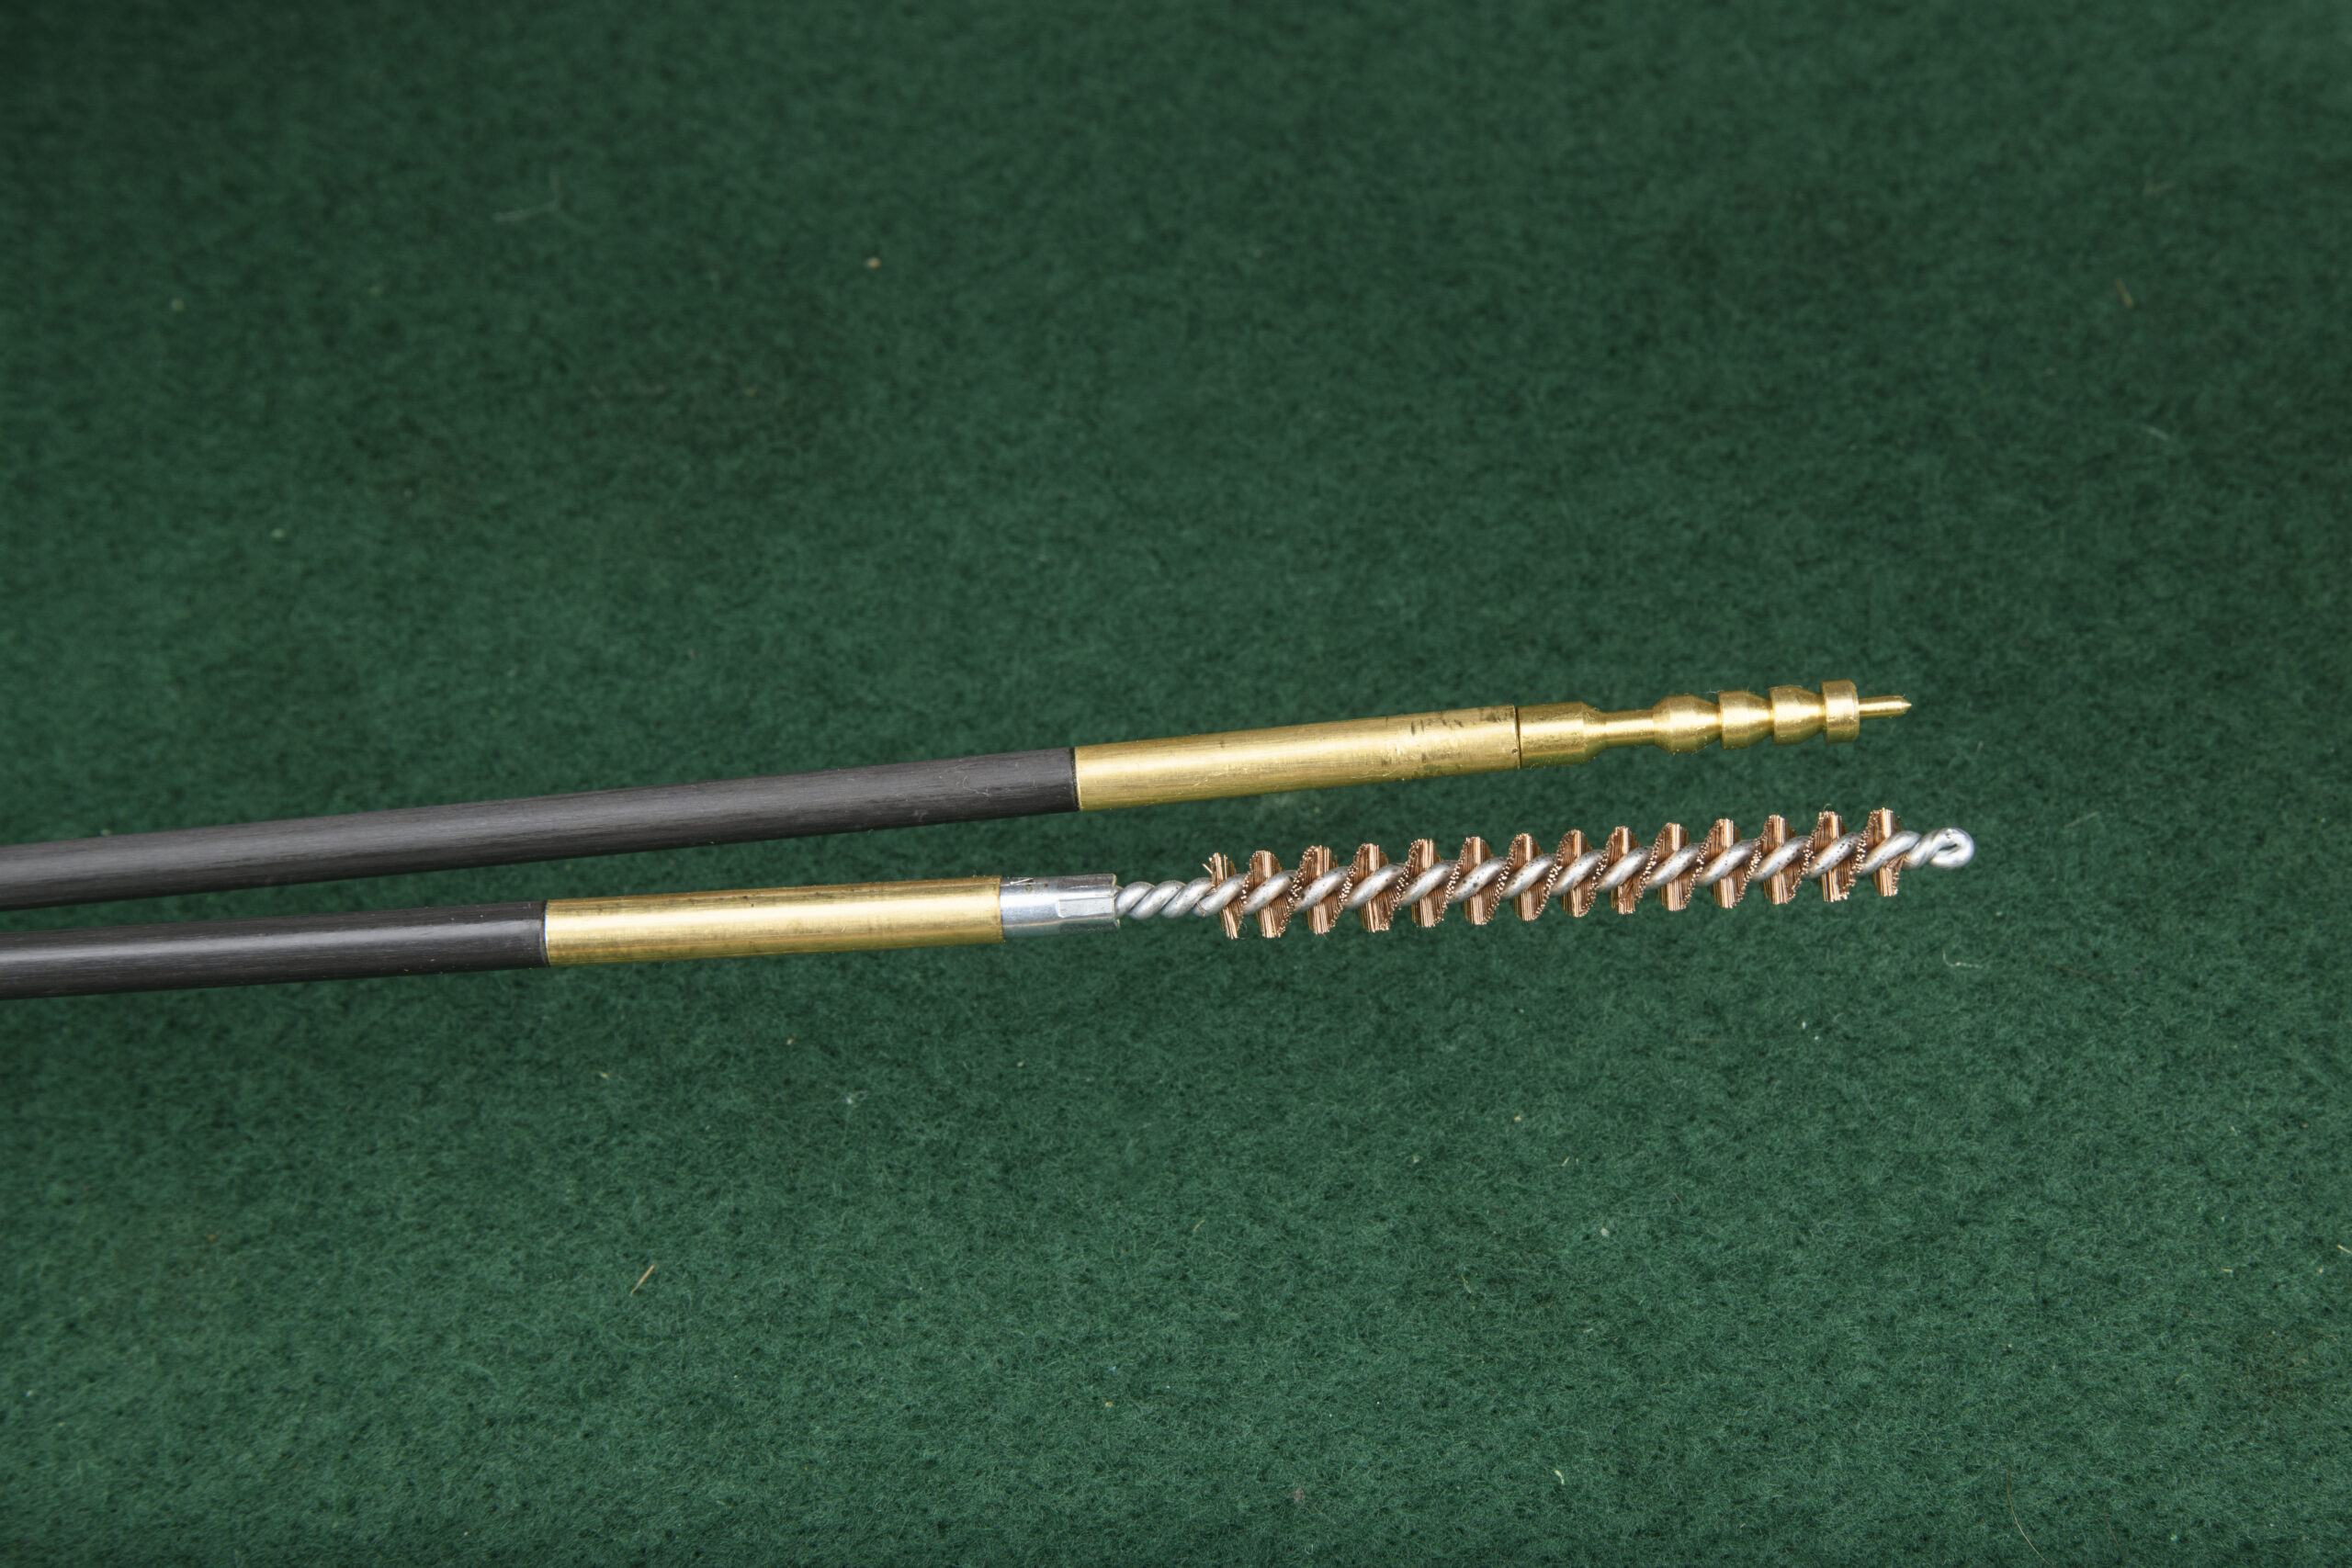 Bronze brushes and jags for cleaning a rifle, on a green felt background.